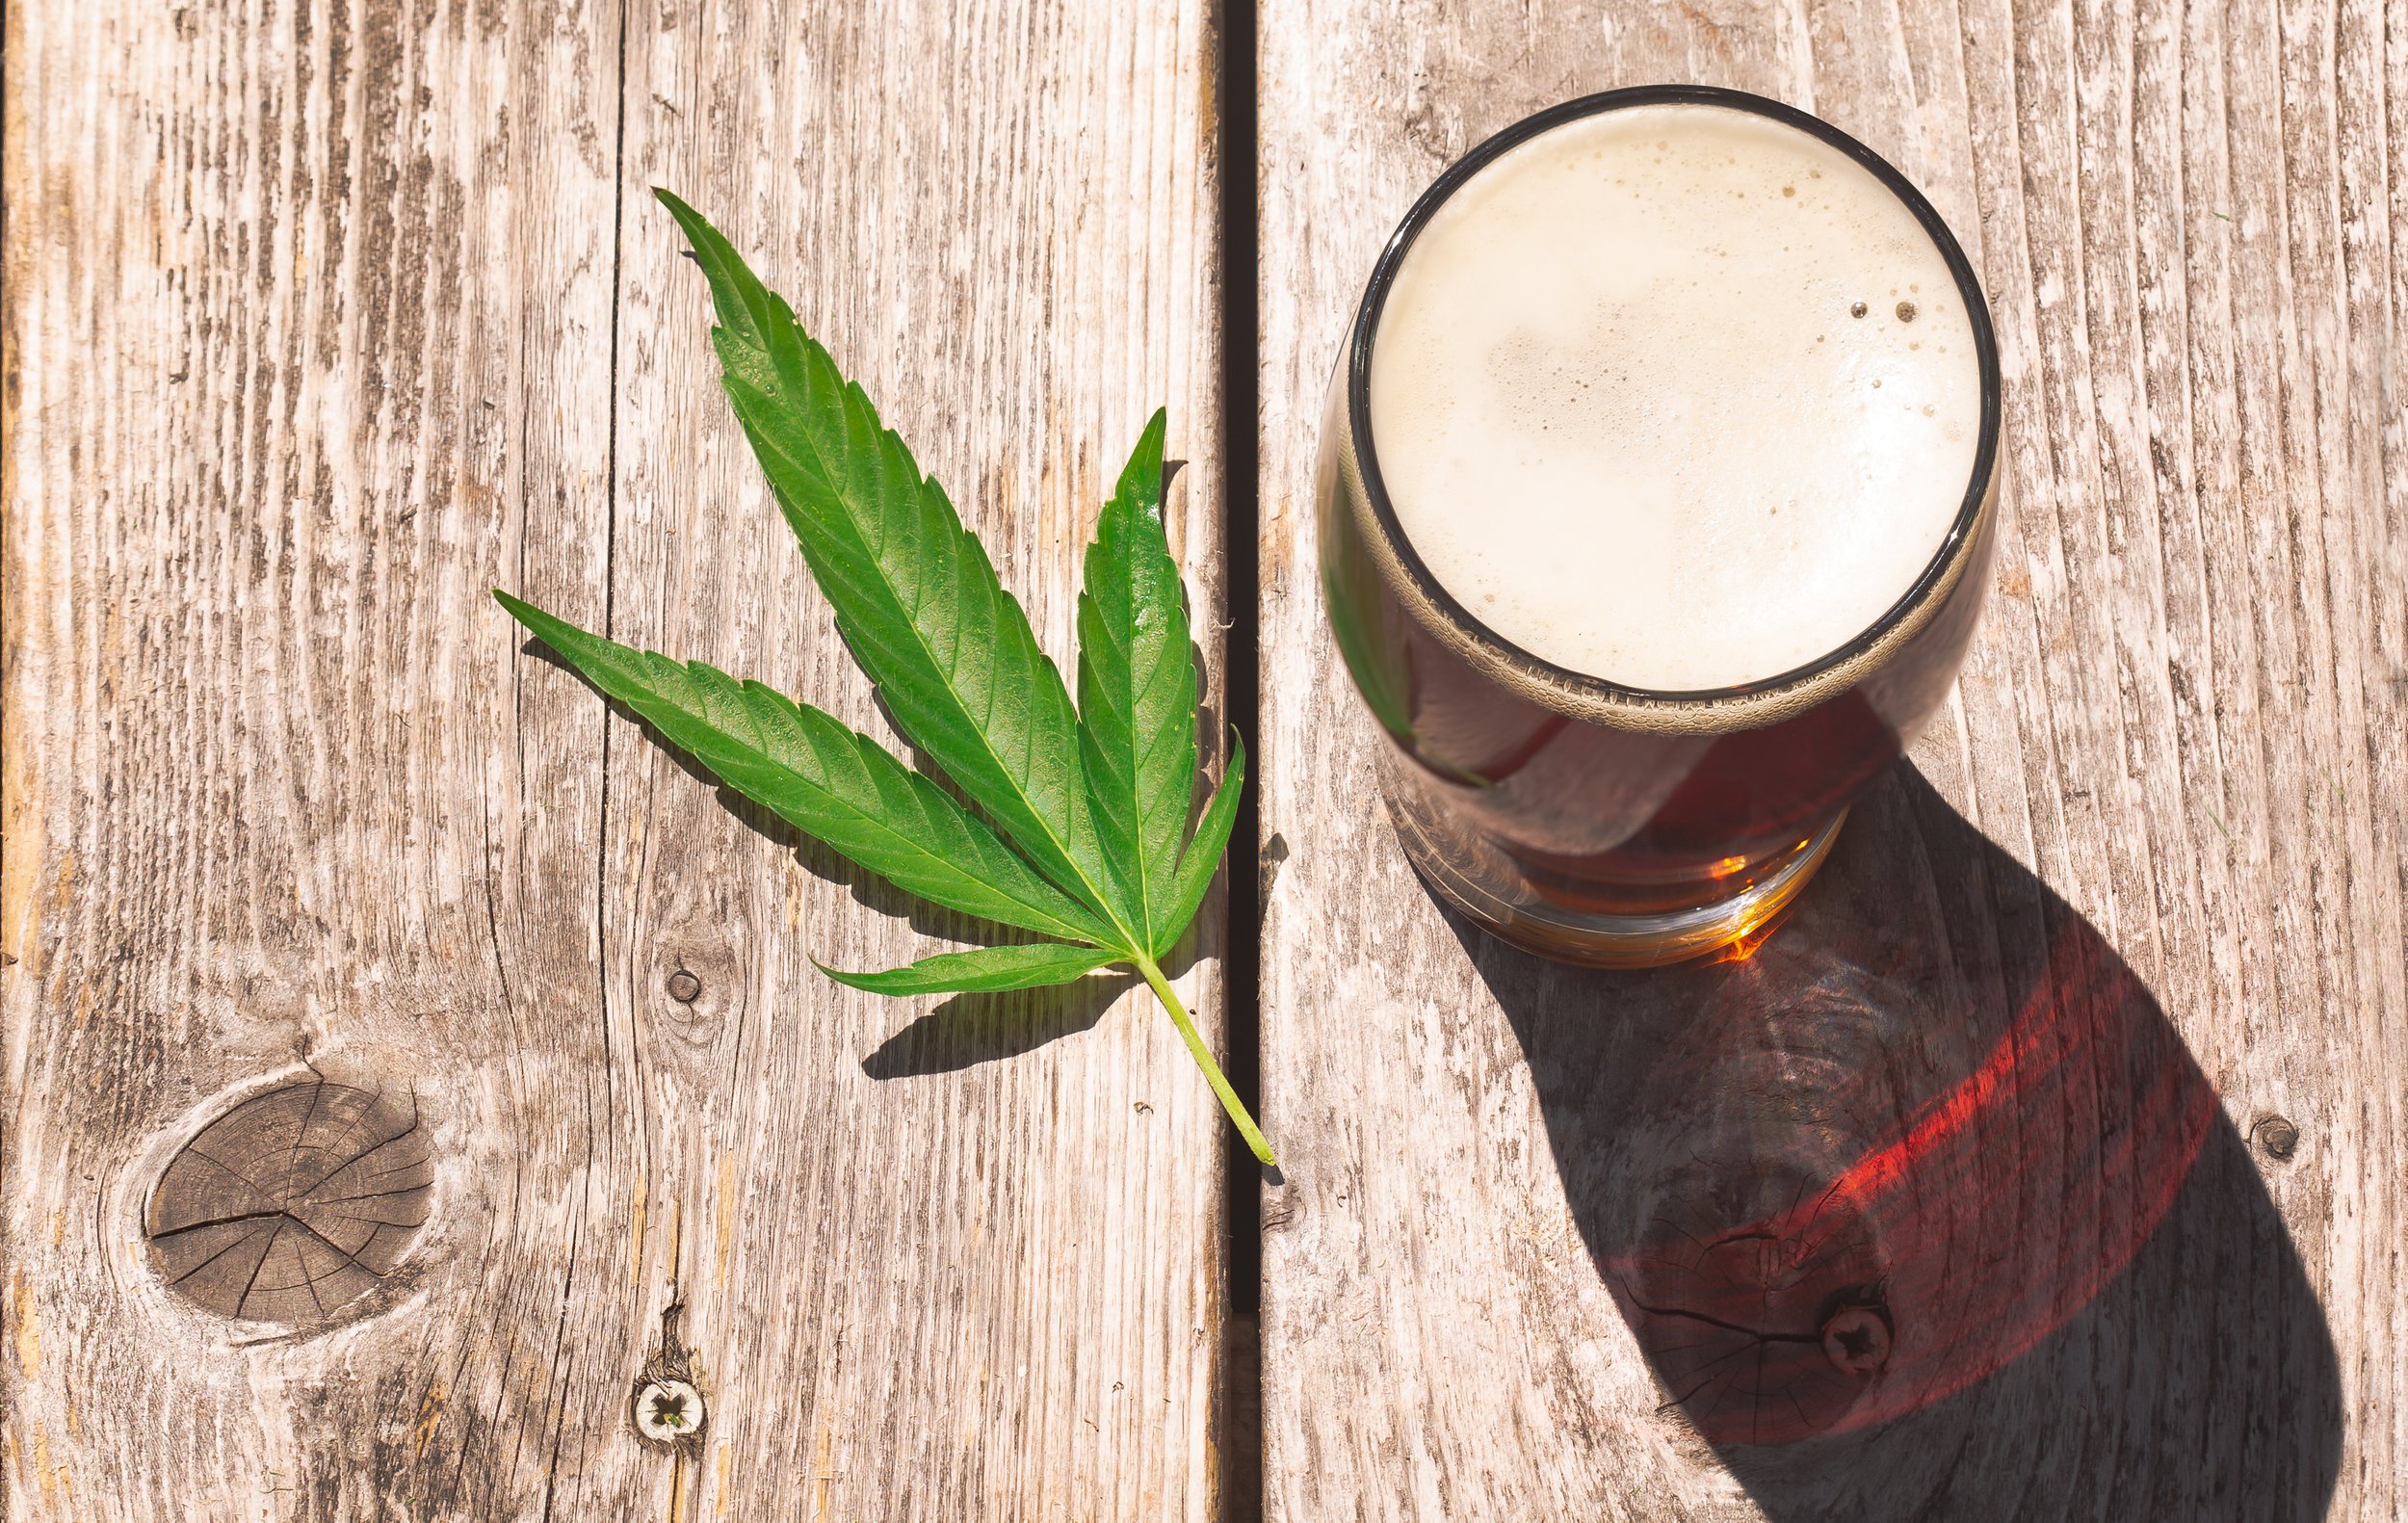 Ask A Stoner: Is It Bad To Smoke Weed And Drink Alcohol?